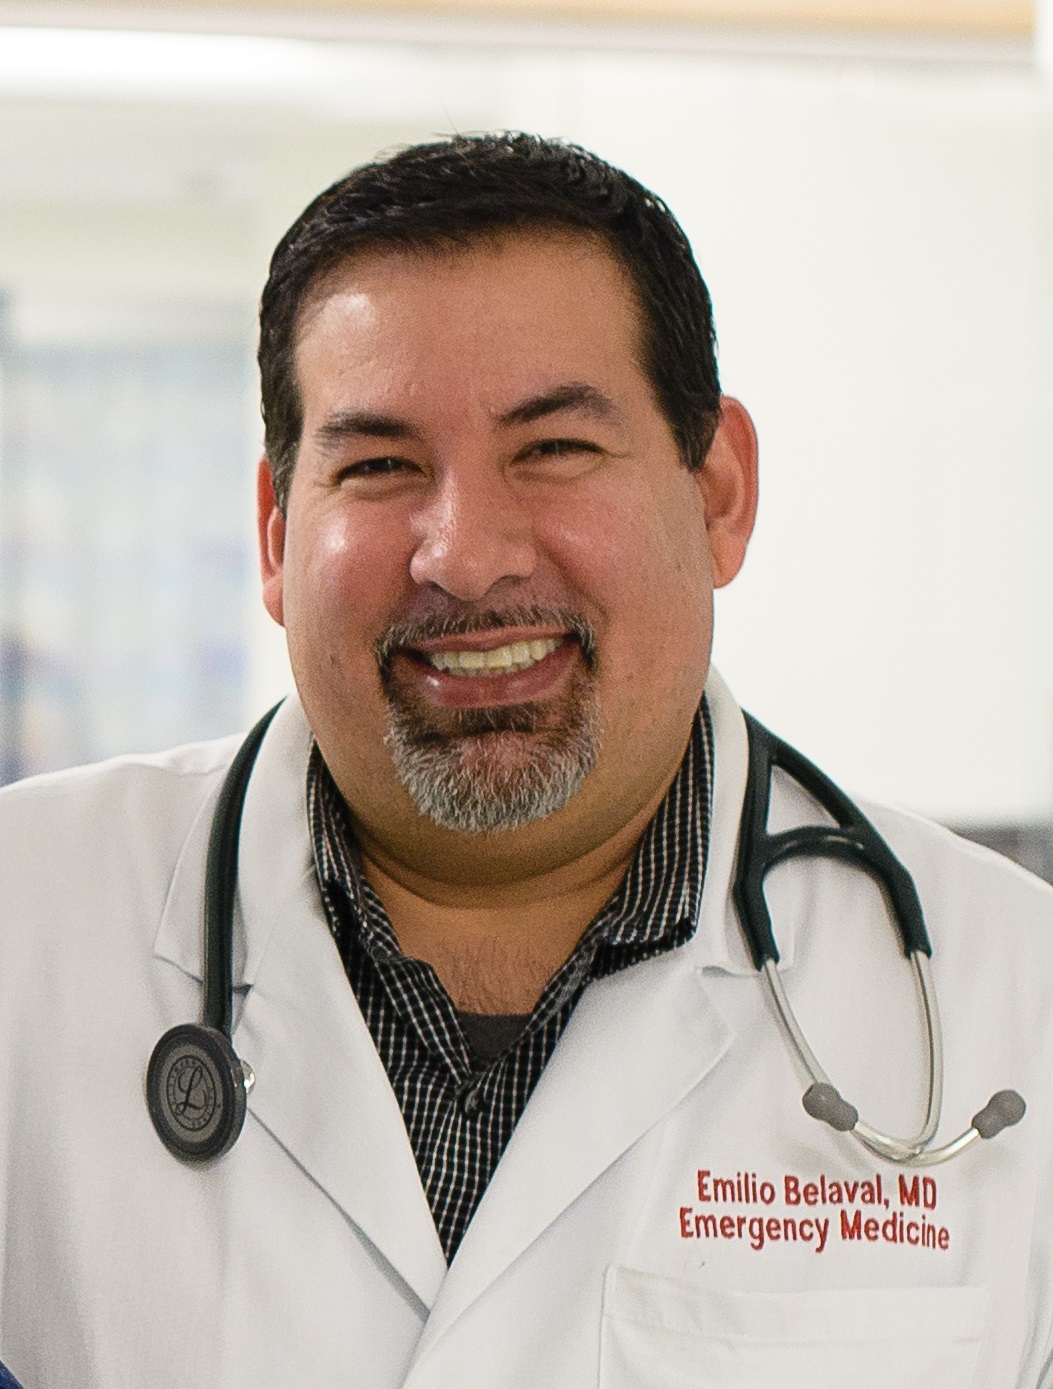 Emilio Belaval, MD, Chief of Emergency Services